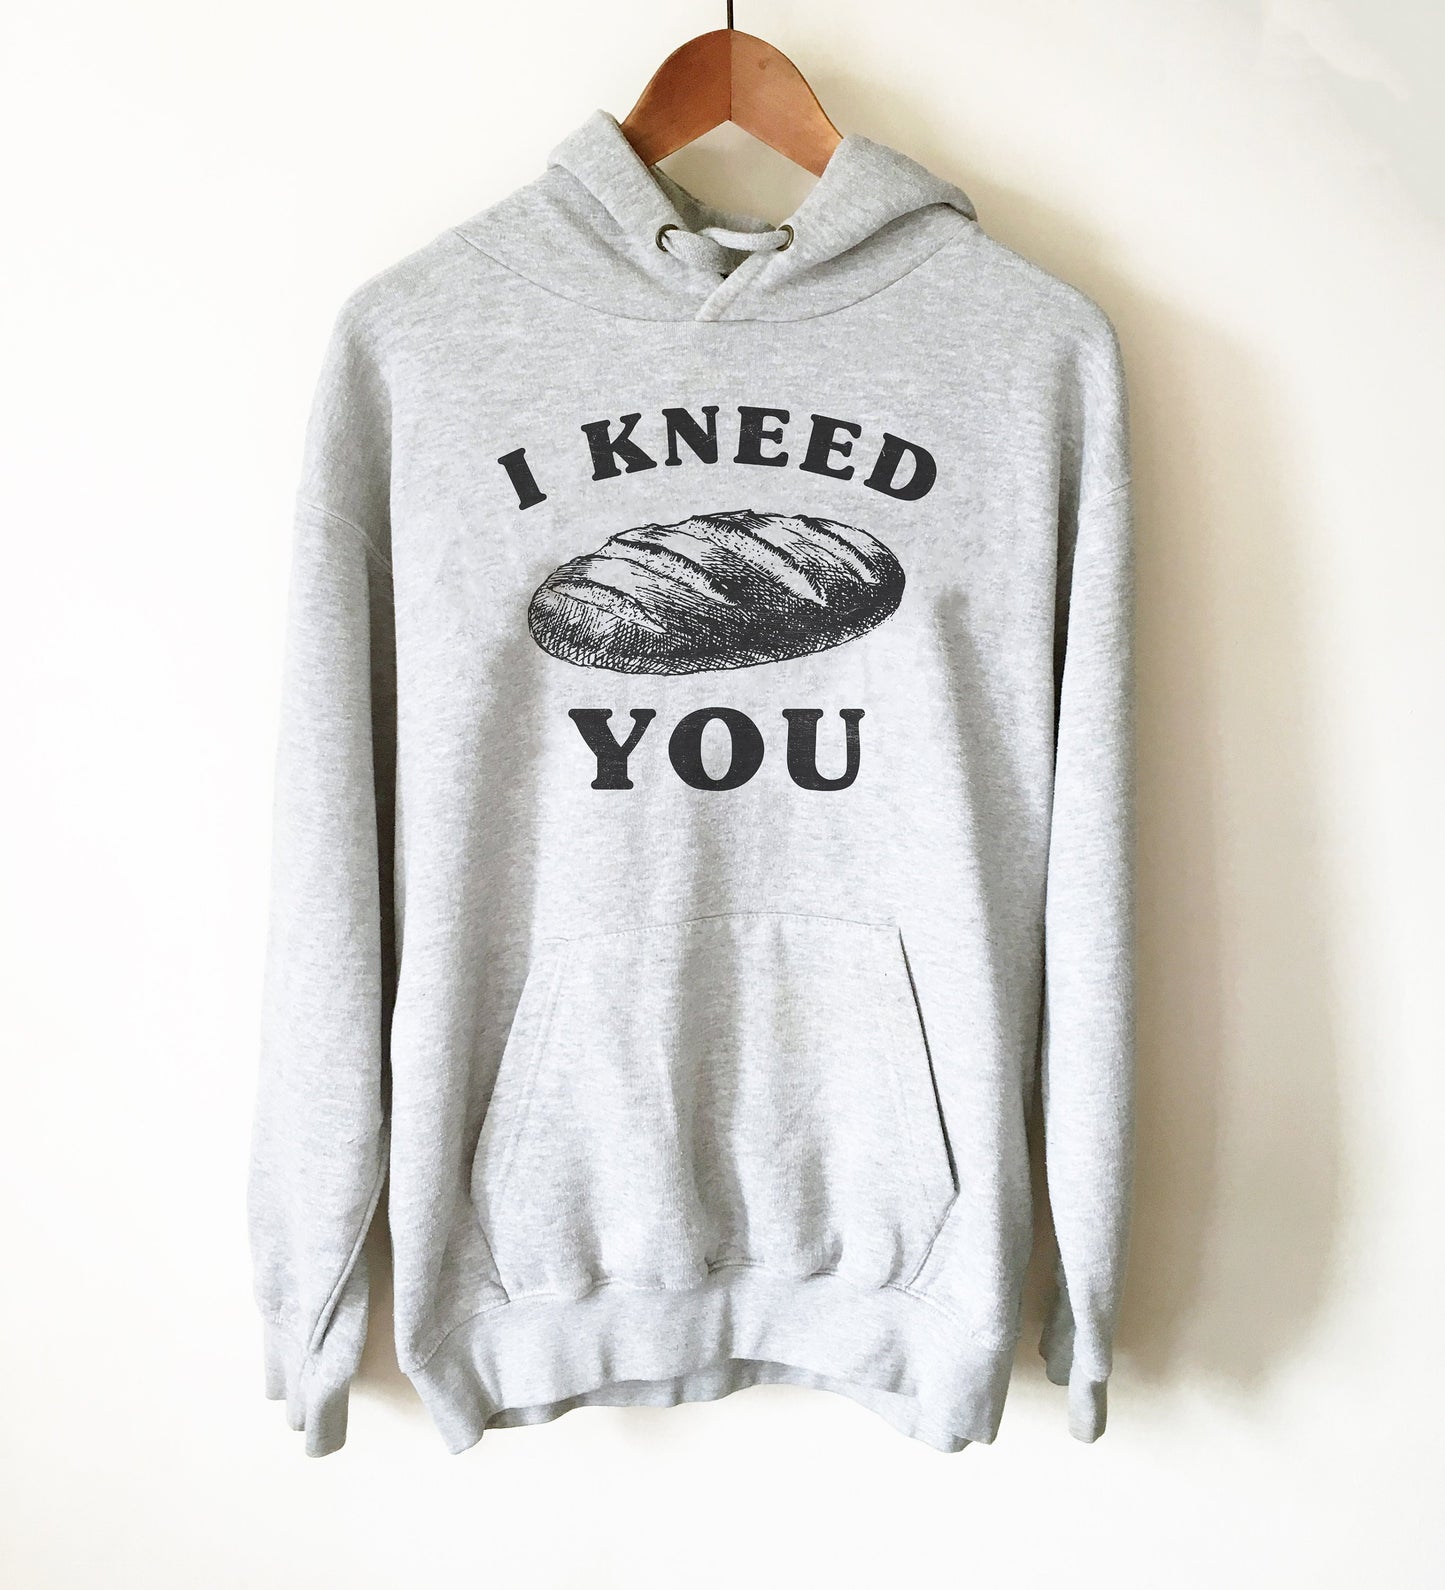 I Kneed You Shirt - Foodie Shirt, Foodie Gift, Funny Food Gift, Food Lover Gift, Bread Lover, Couple Anniversary Gift, Valentines Gift